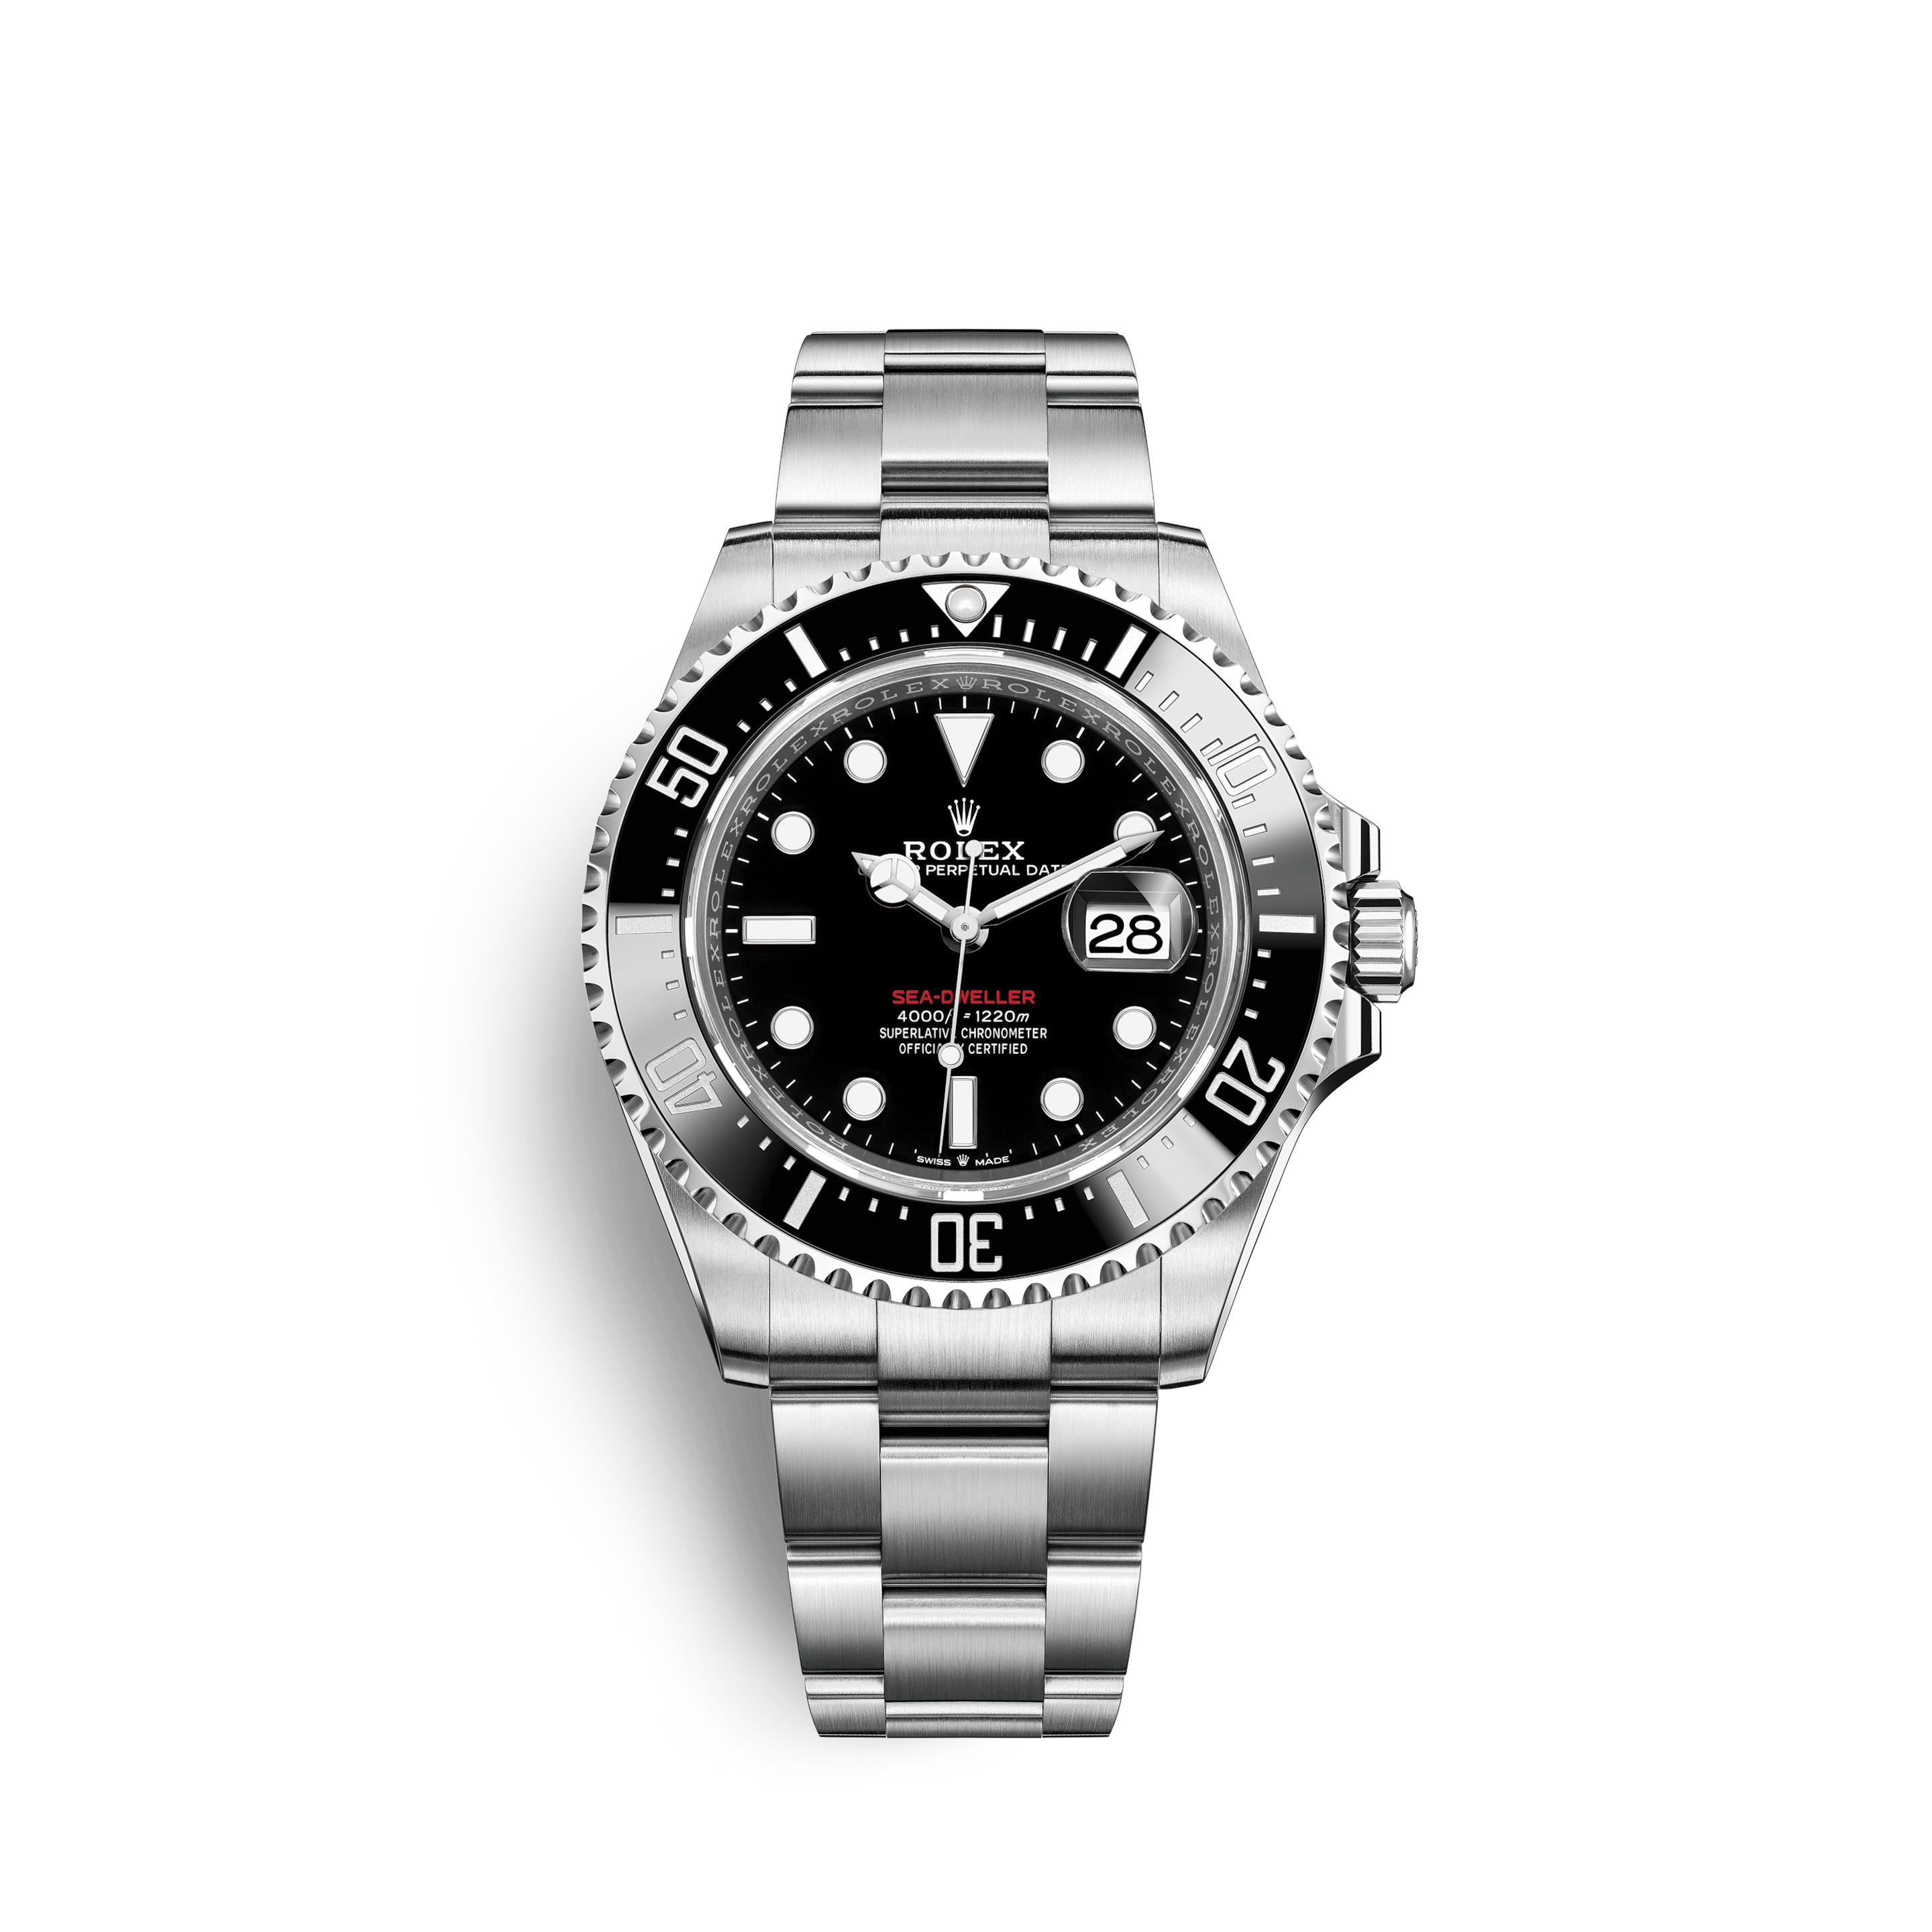 Rolex 5513 Submariner Glossy Dial